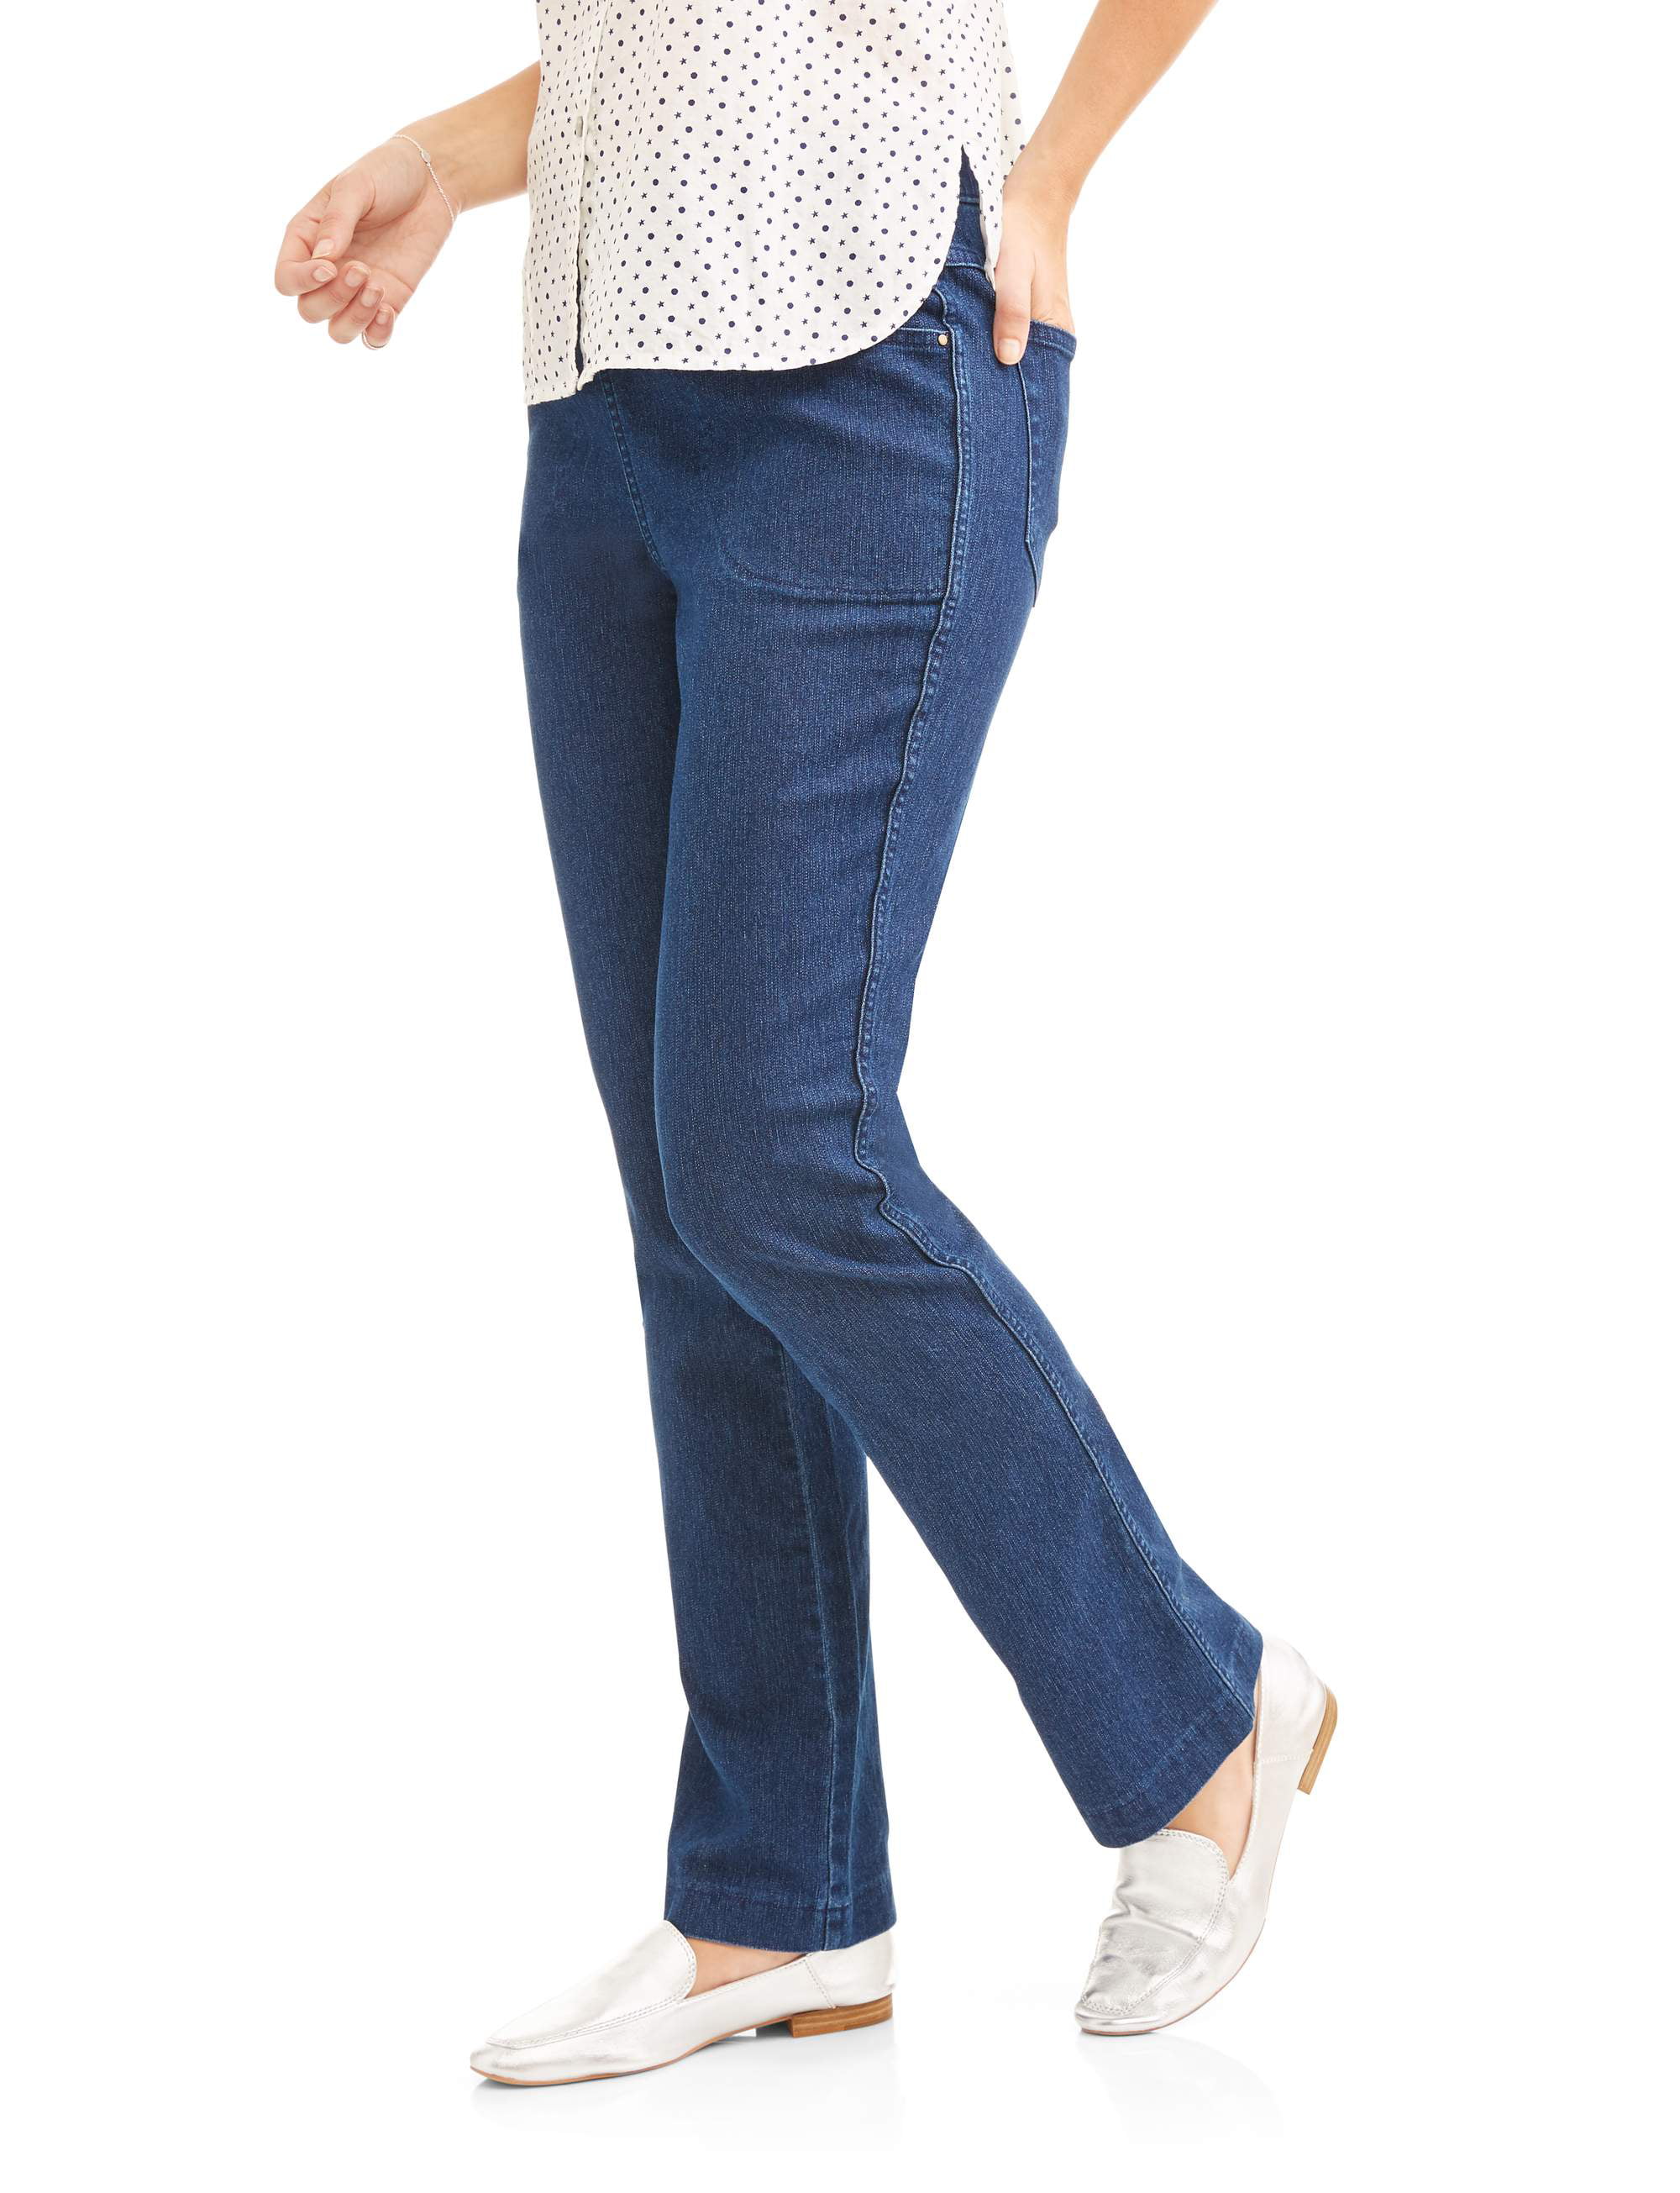 Women's Stretch Denim Pull On Bootcut, Available in Regular & Petite Sizing